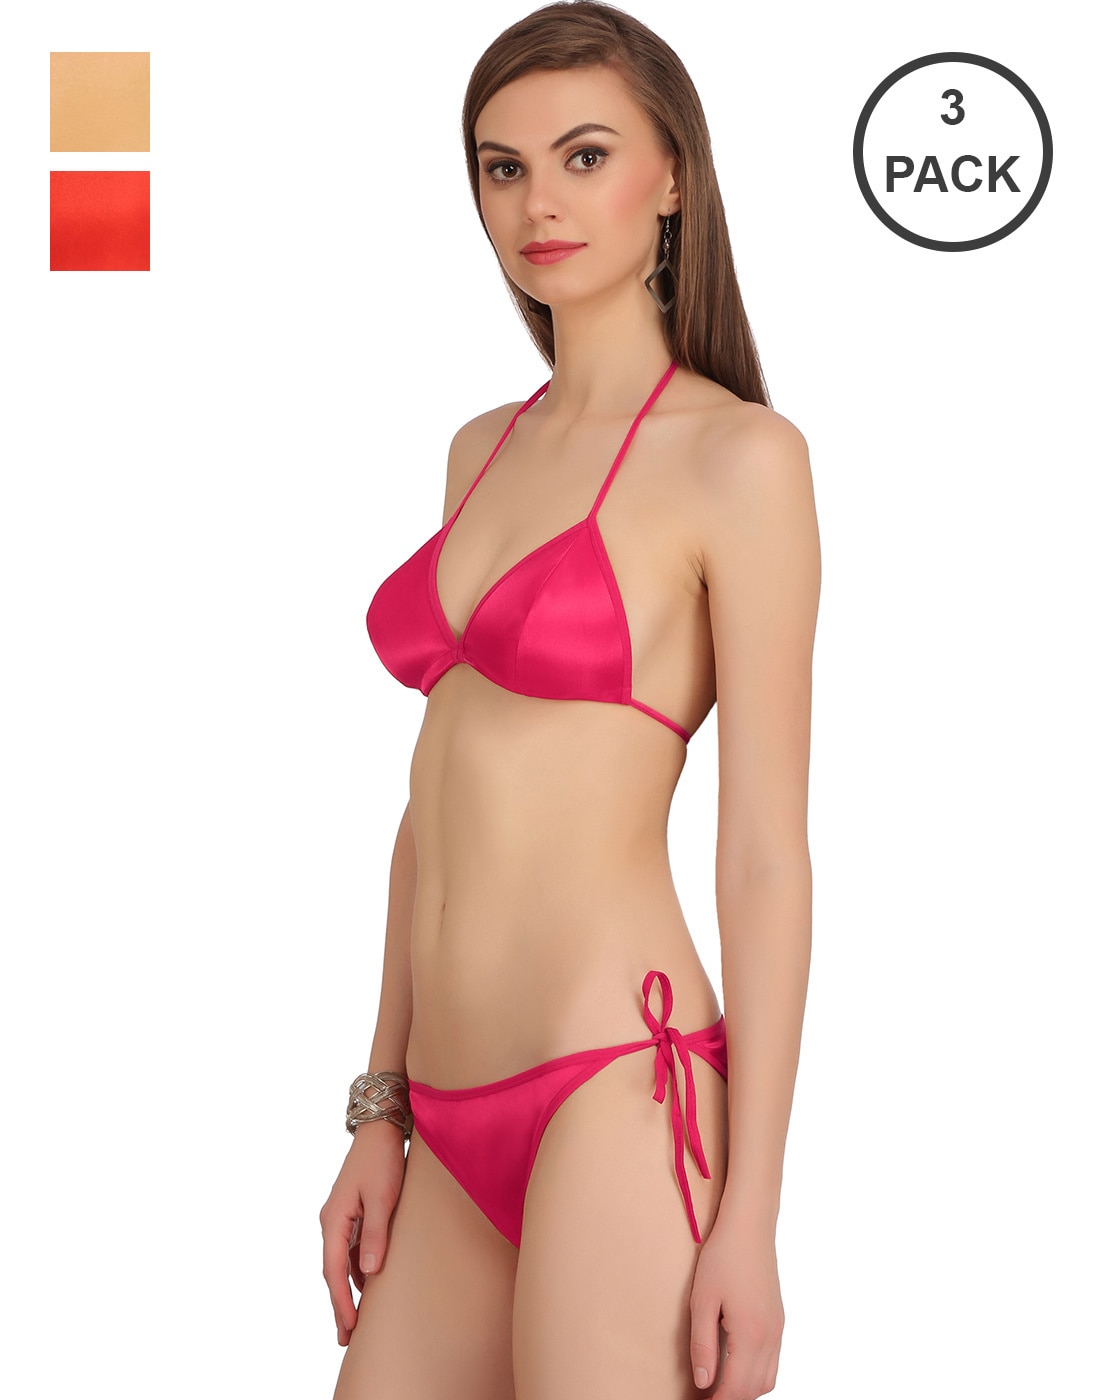 Pack of 3 Lingerie Set with Tie-Up